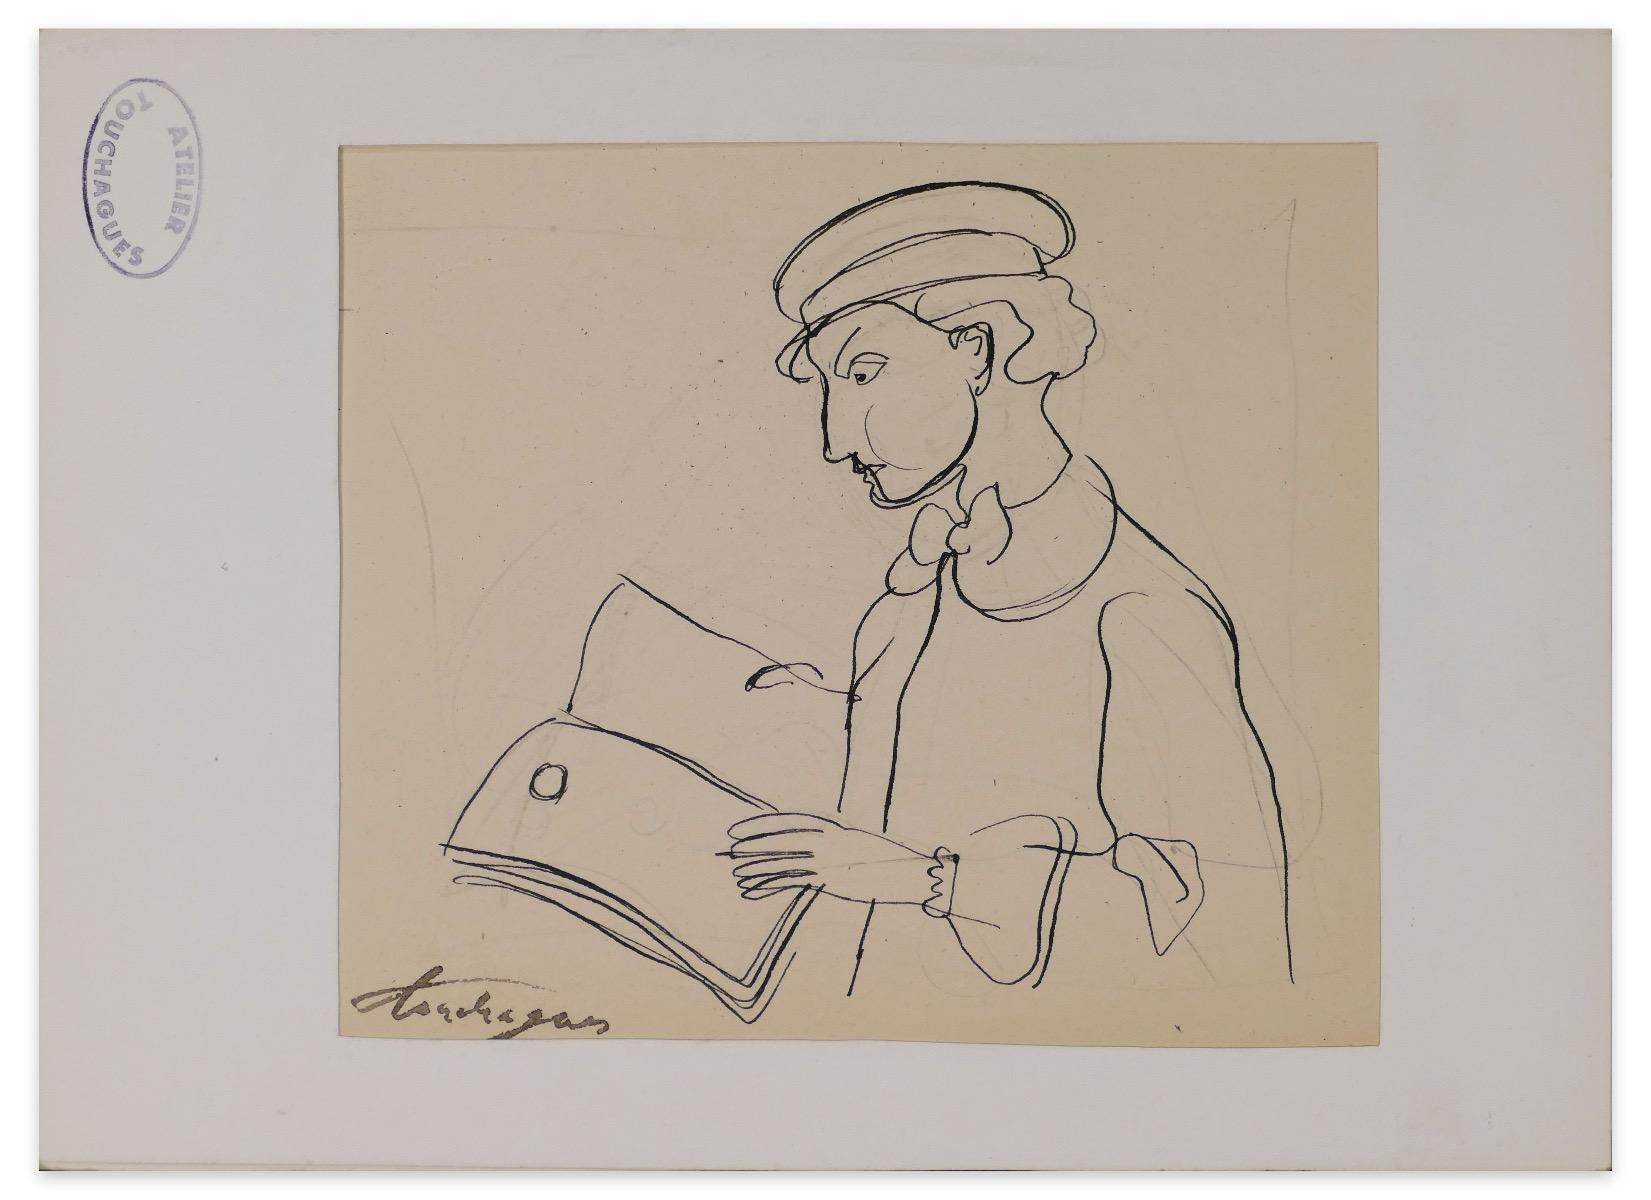 Louis Touchagues Figurative Art - Man Reading - Original Ink Drawing on Paper - Mid-20th Century